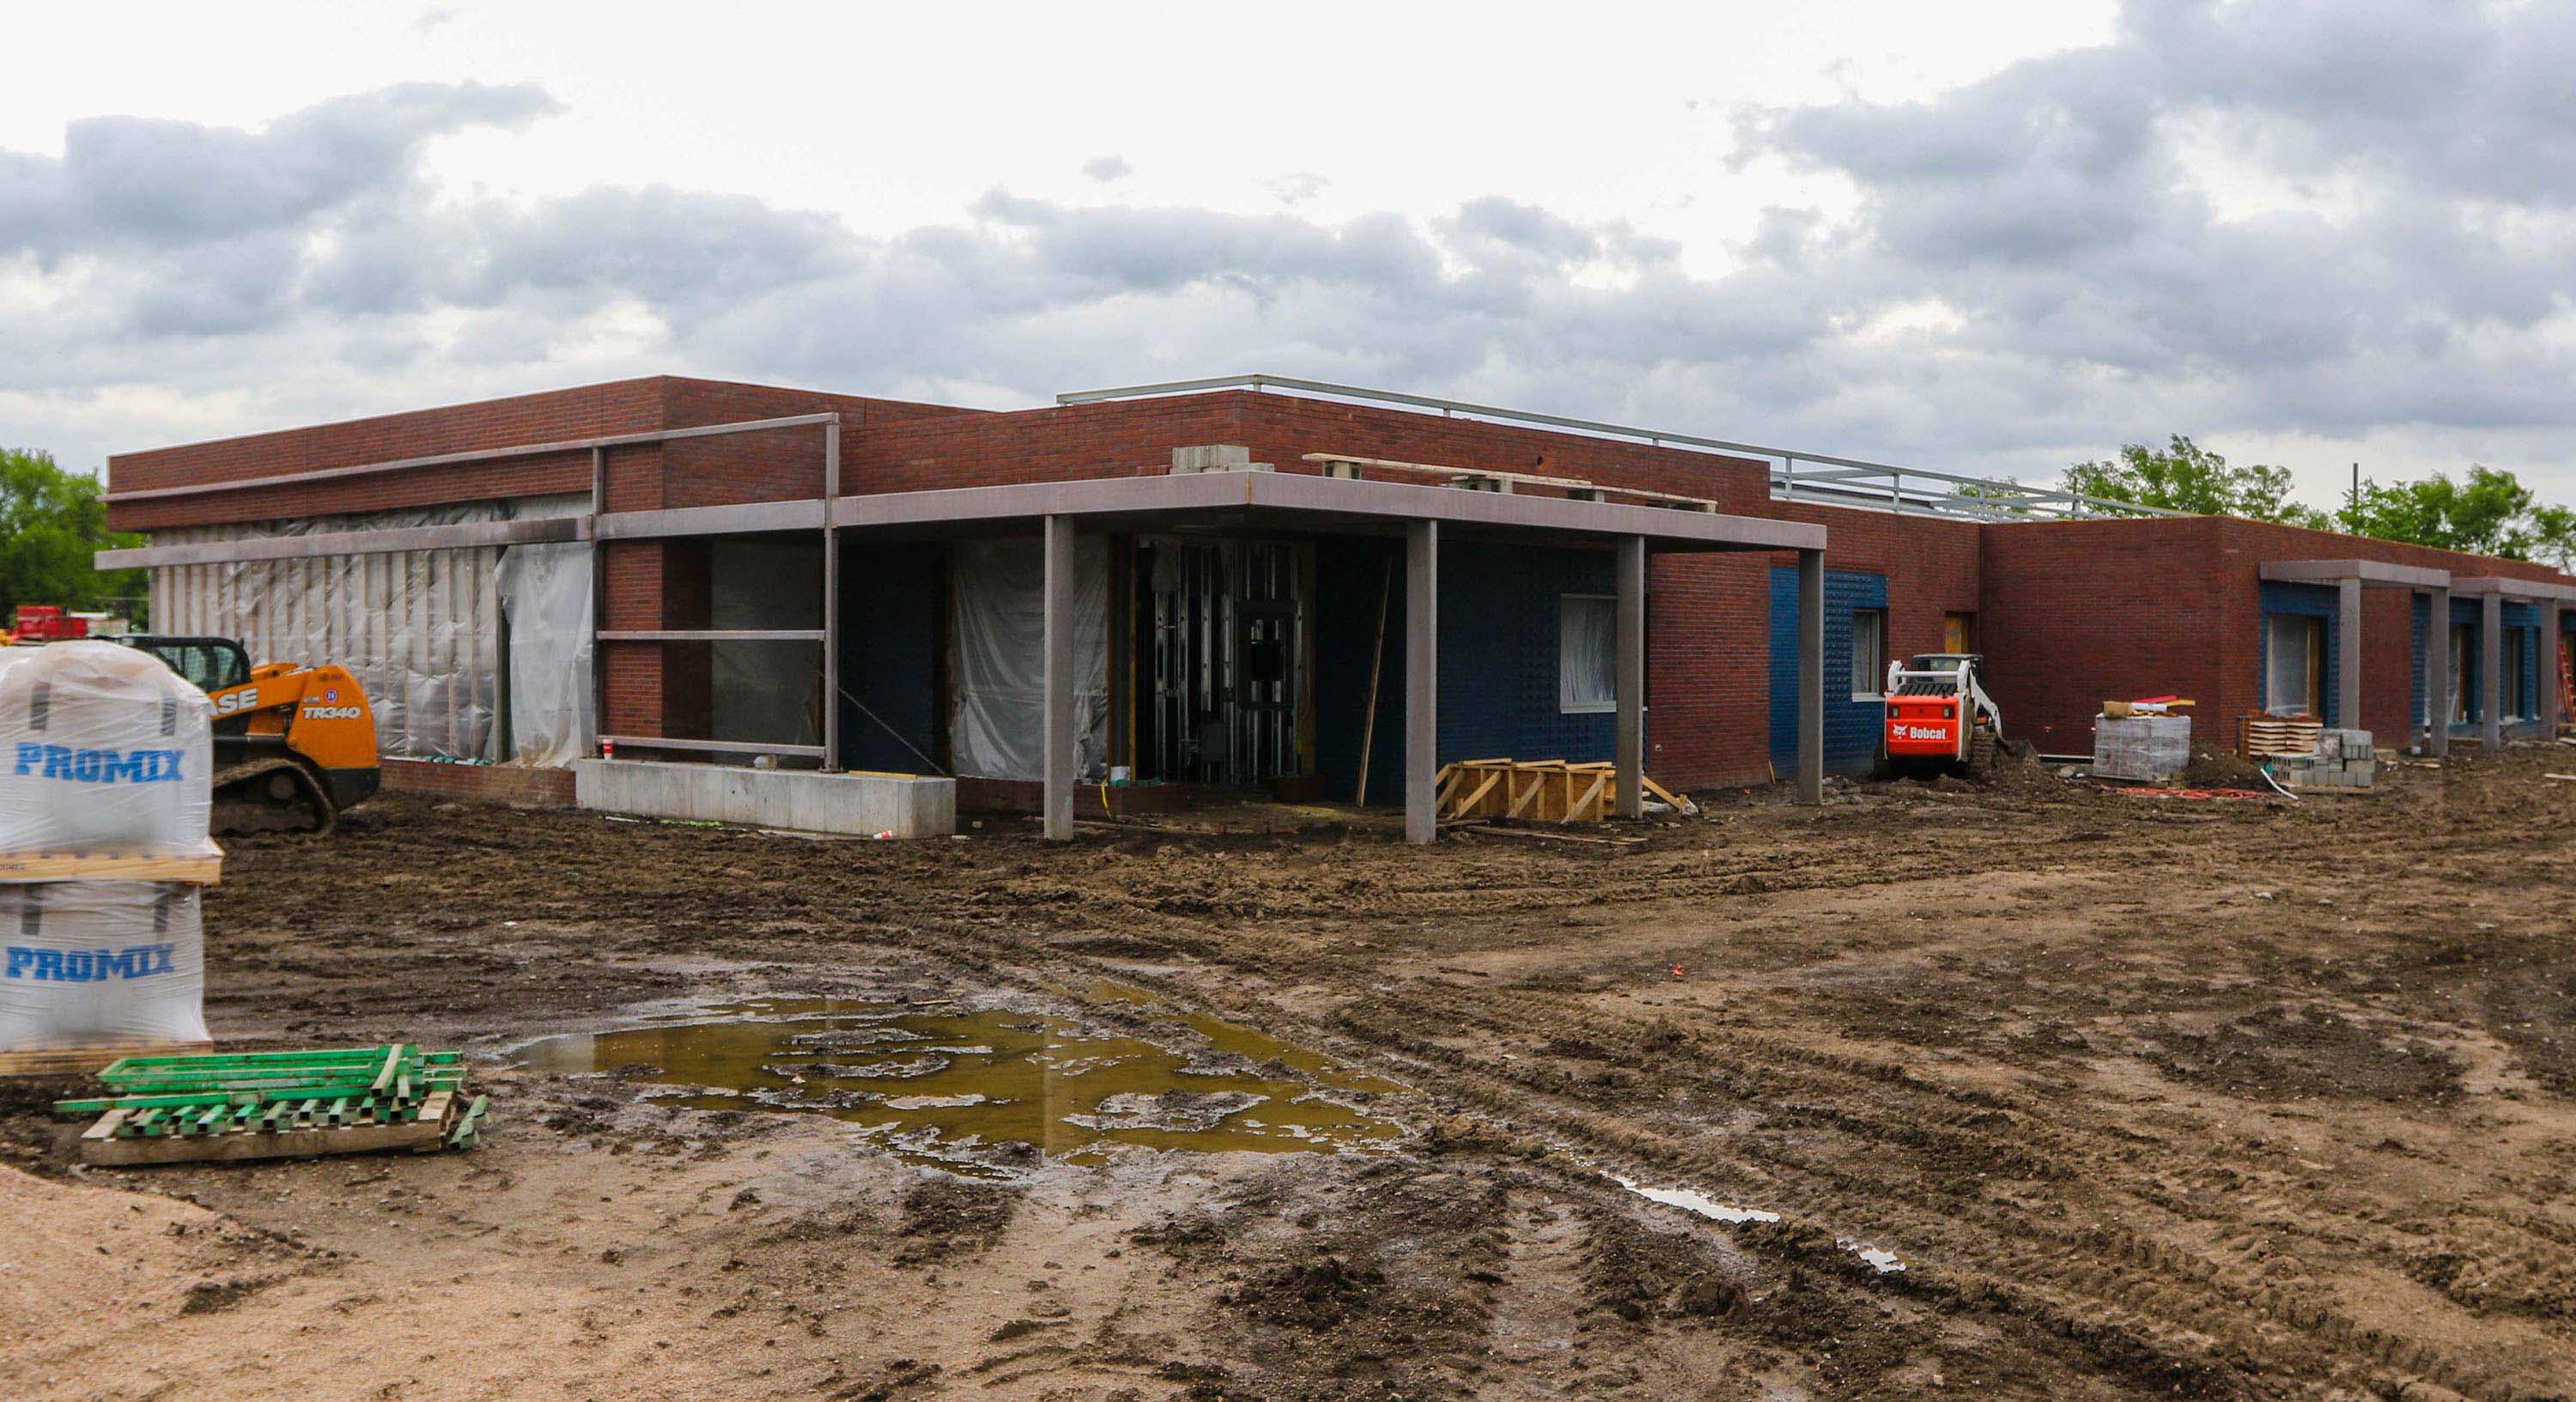 The LaVonne Kopecky Plambeck Early Childhood Education Center is scheduled to open in September on UNK’s University Village development just south of U.S. Highway 30. (Photo by Todd Gottula, UNK Communications)